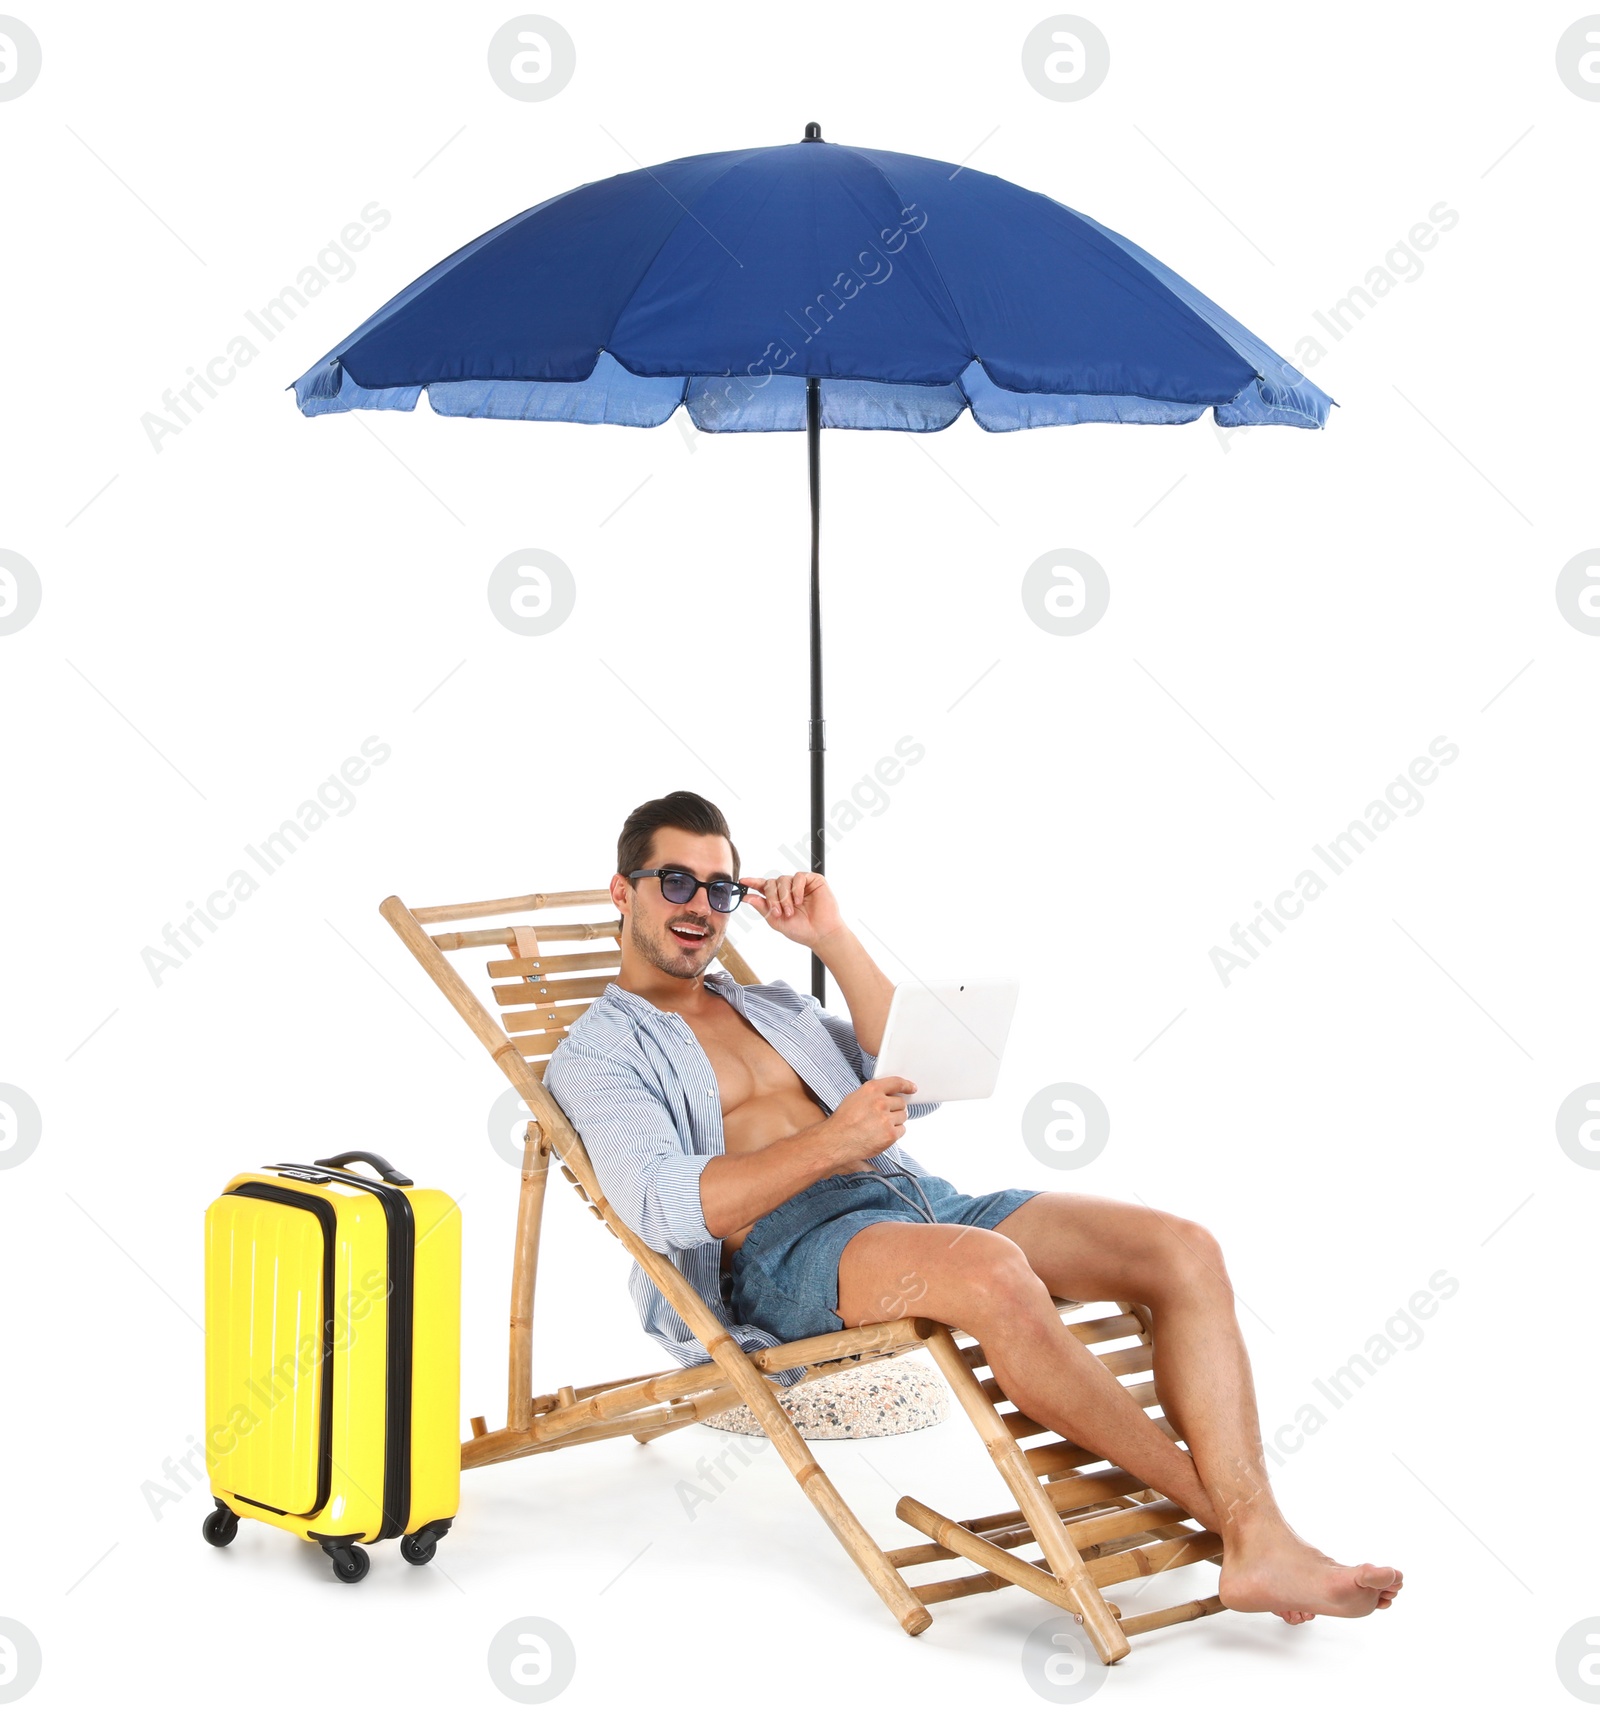 Photo of Young man with tablet and suitcase on sun lounger under umbrella against white background. Beach accessories